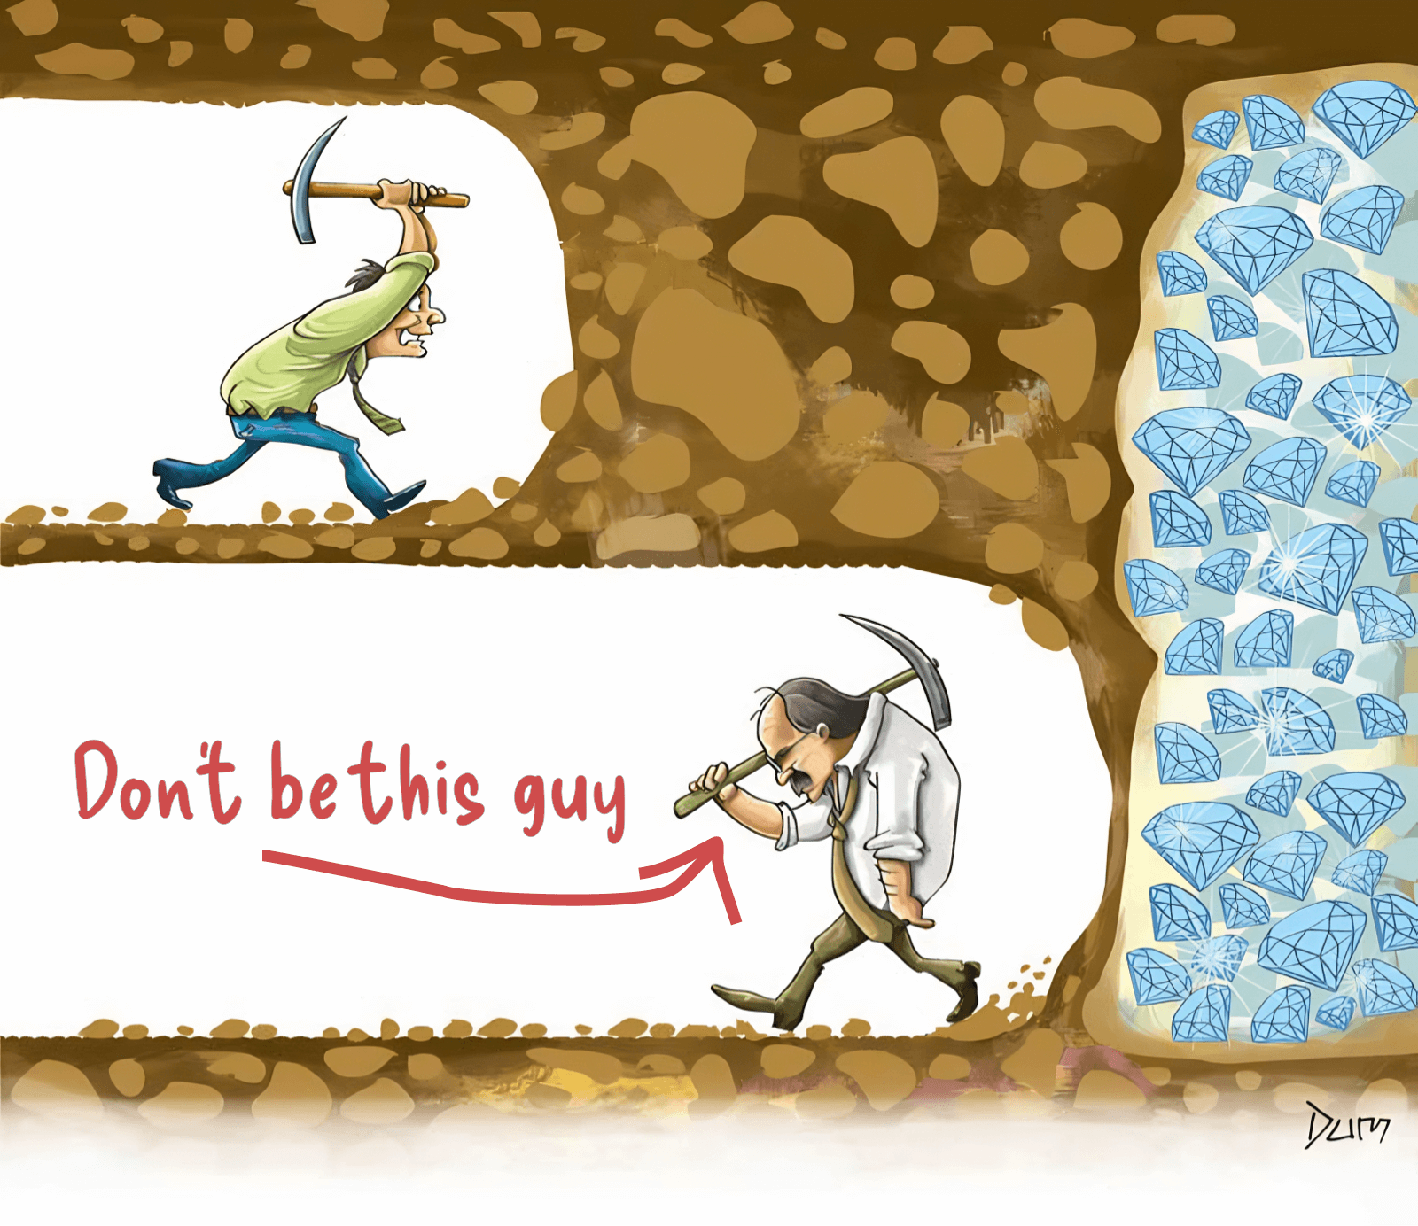 Cross section of a mine, the top level of which shows a man making his way through solid rock, the bottom panel showing a man walking away after having almost cleared the way entirely